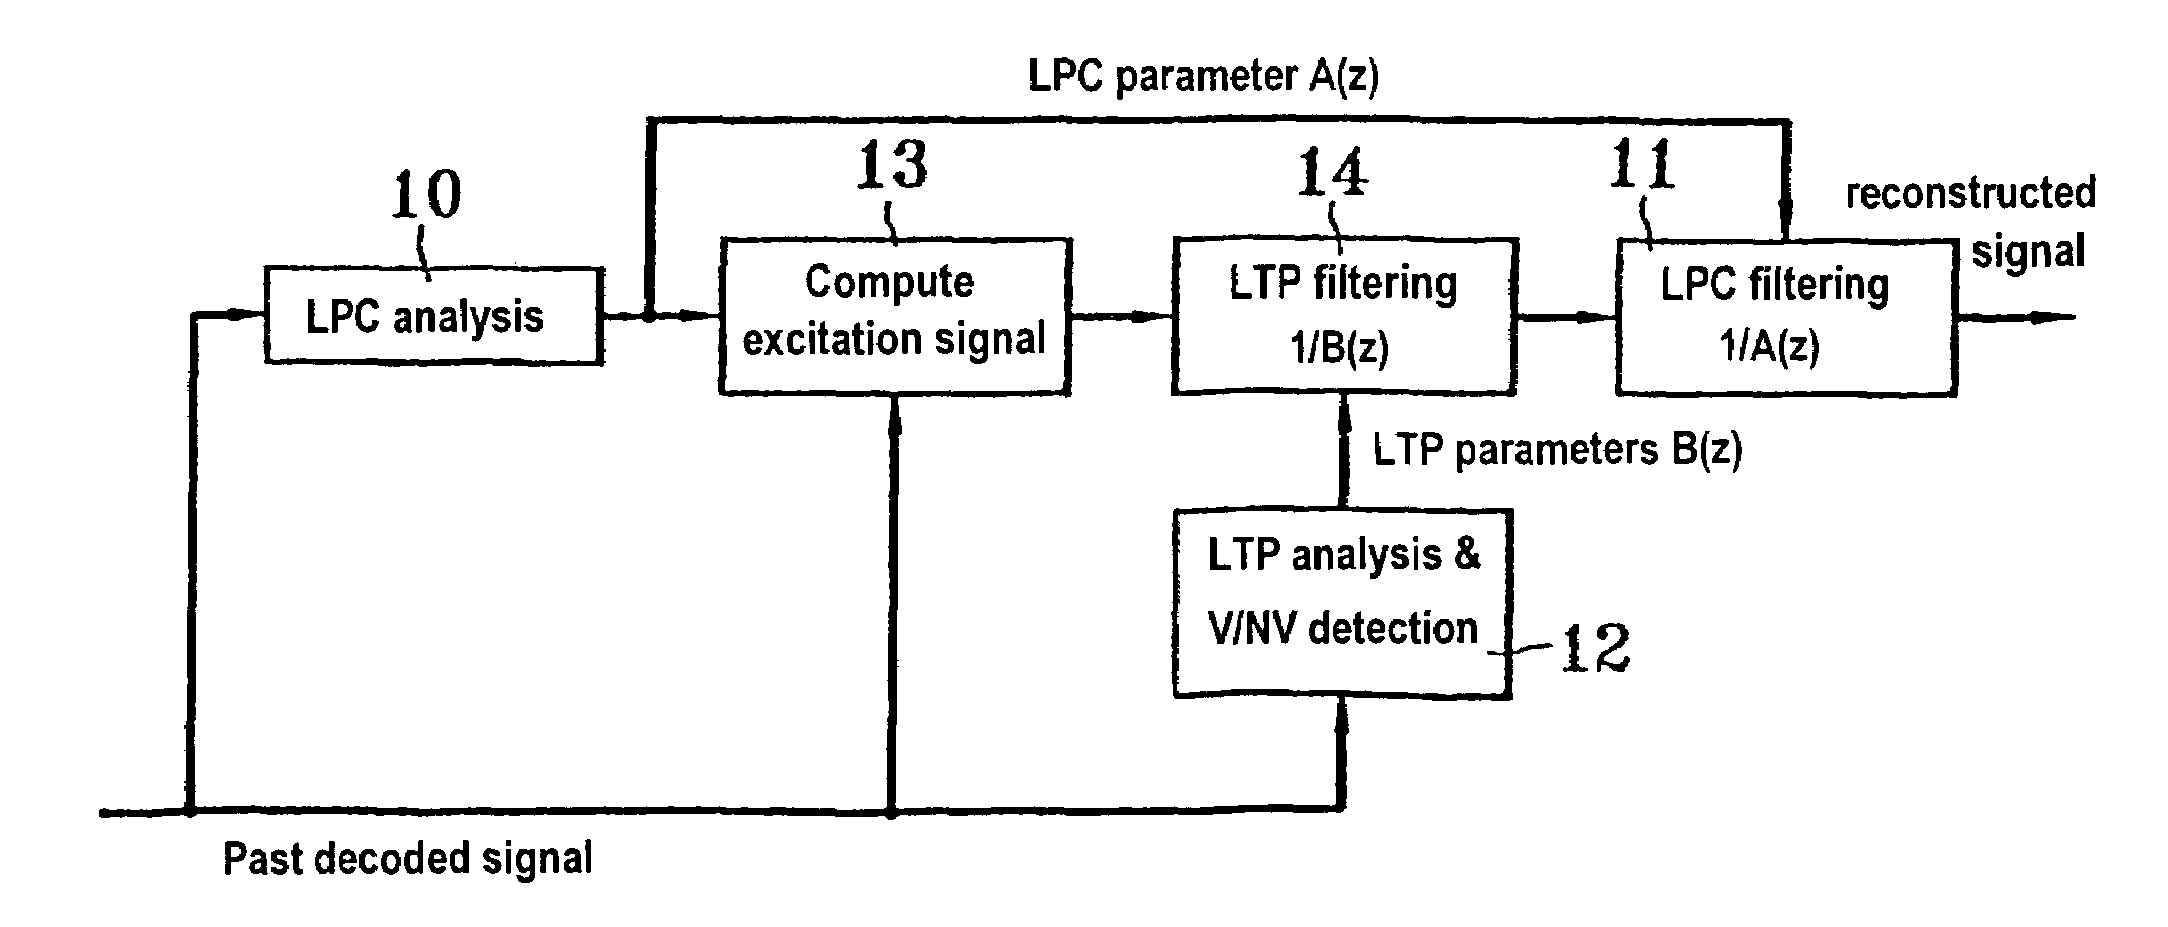 Transmission error concealment in an audio signal